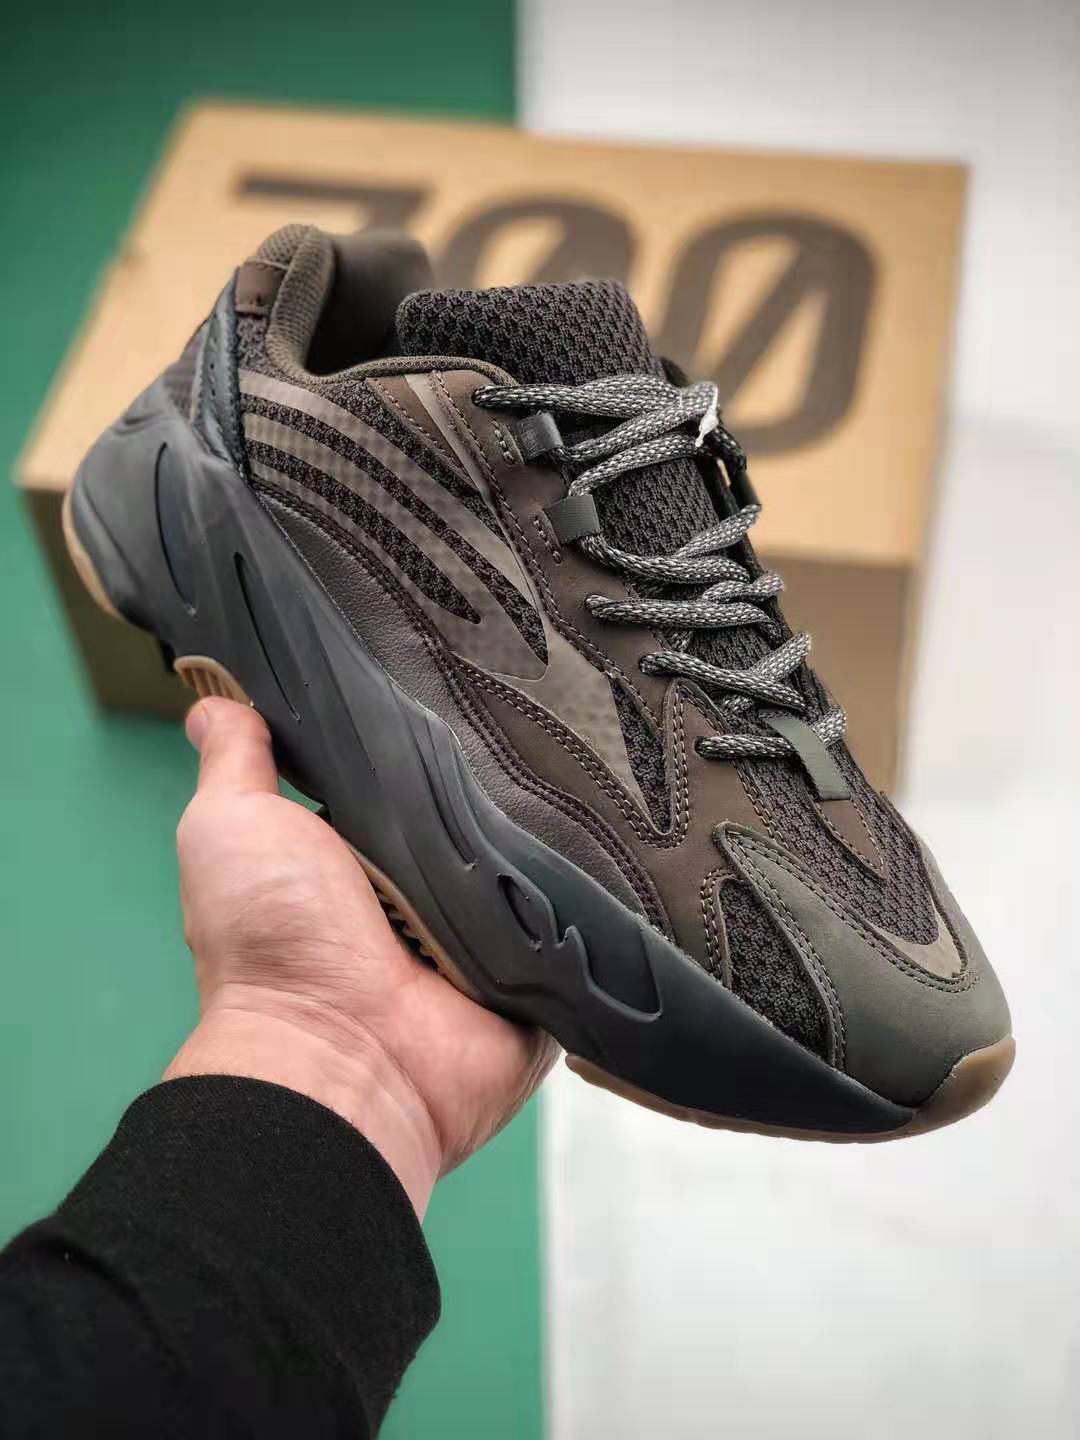 Adidas Yeezy Boost 700 V2 'Geode' EG6860 - Buy the Latest Release Online!